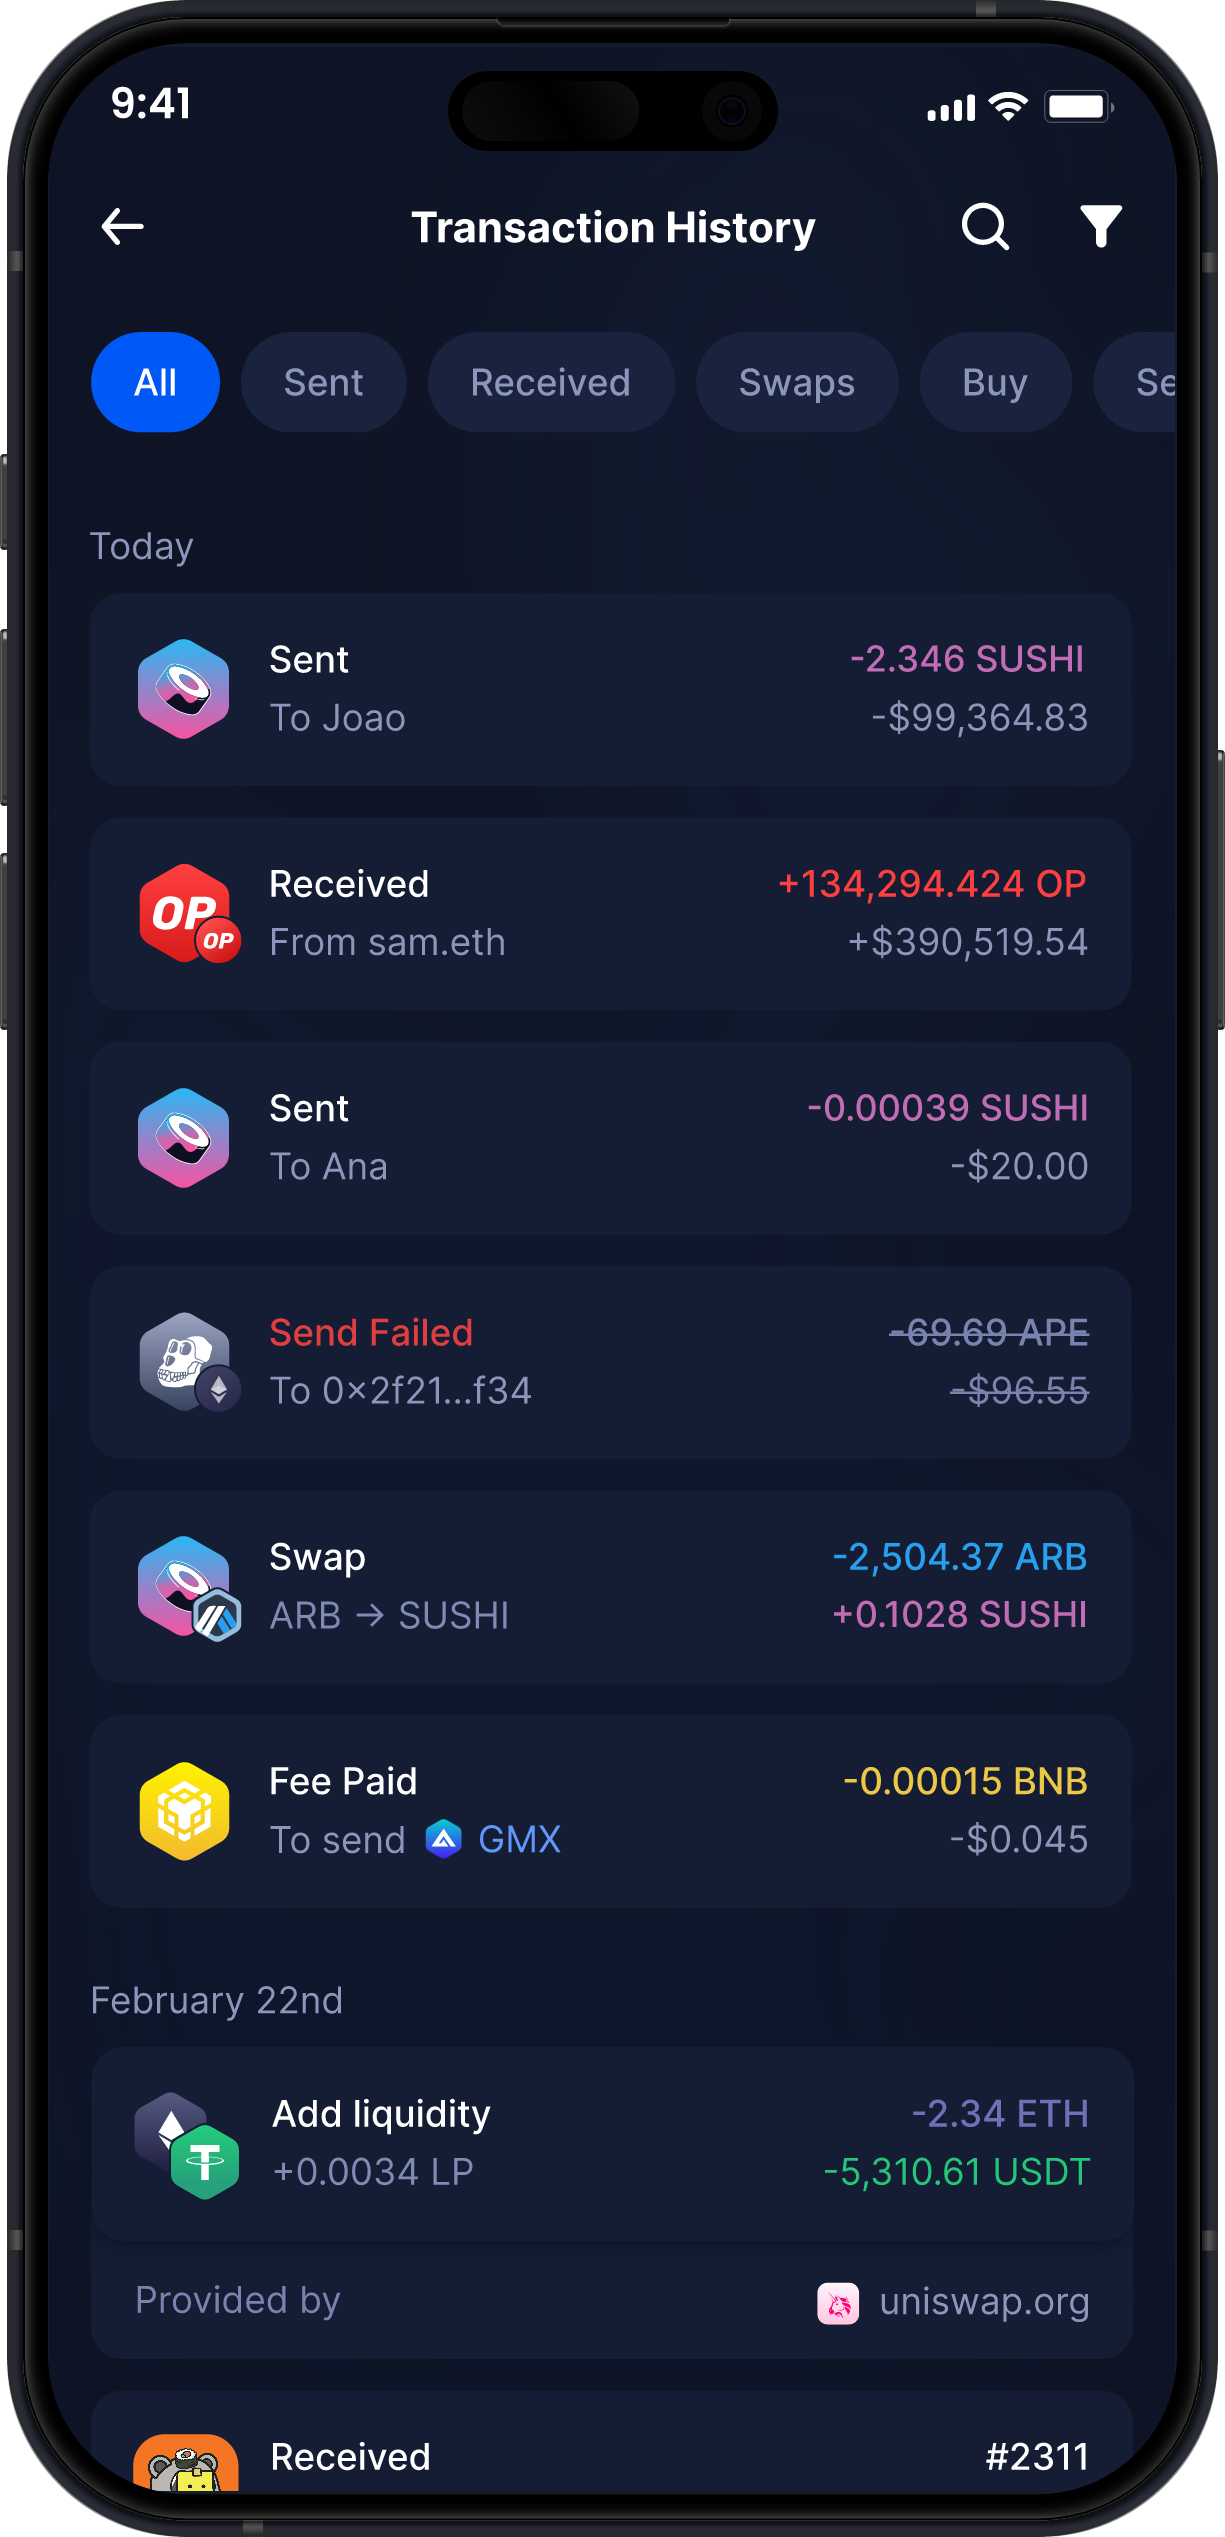 Infinity Mobile SushiSwap Wallet - Complete SUSHI Transaction History